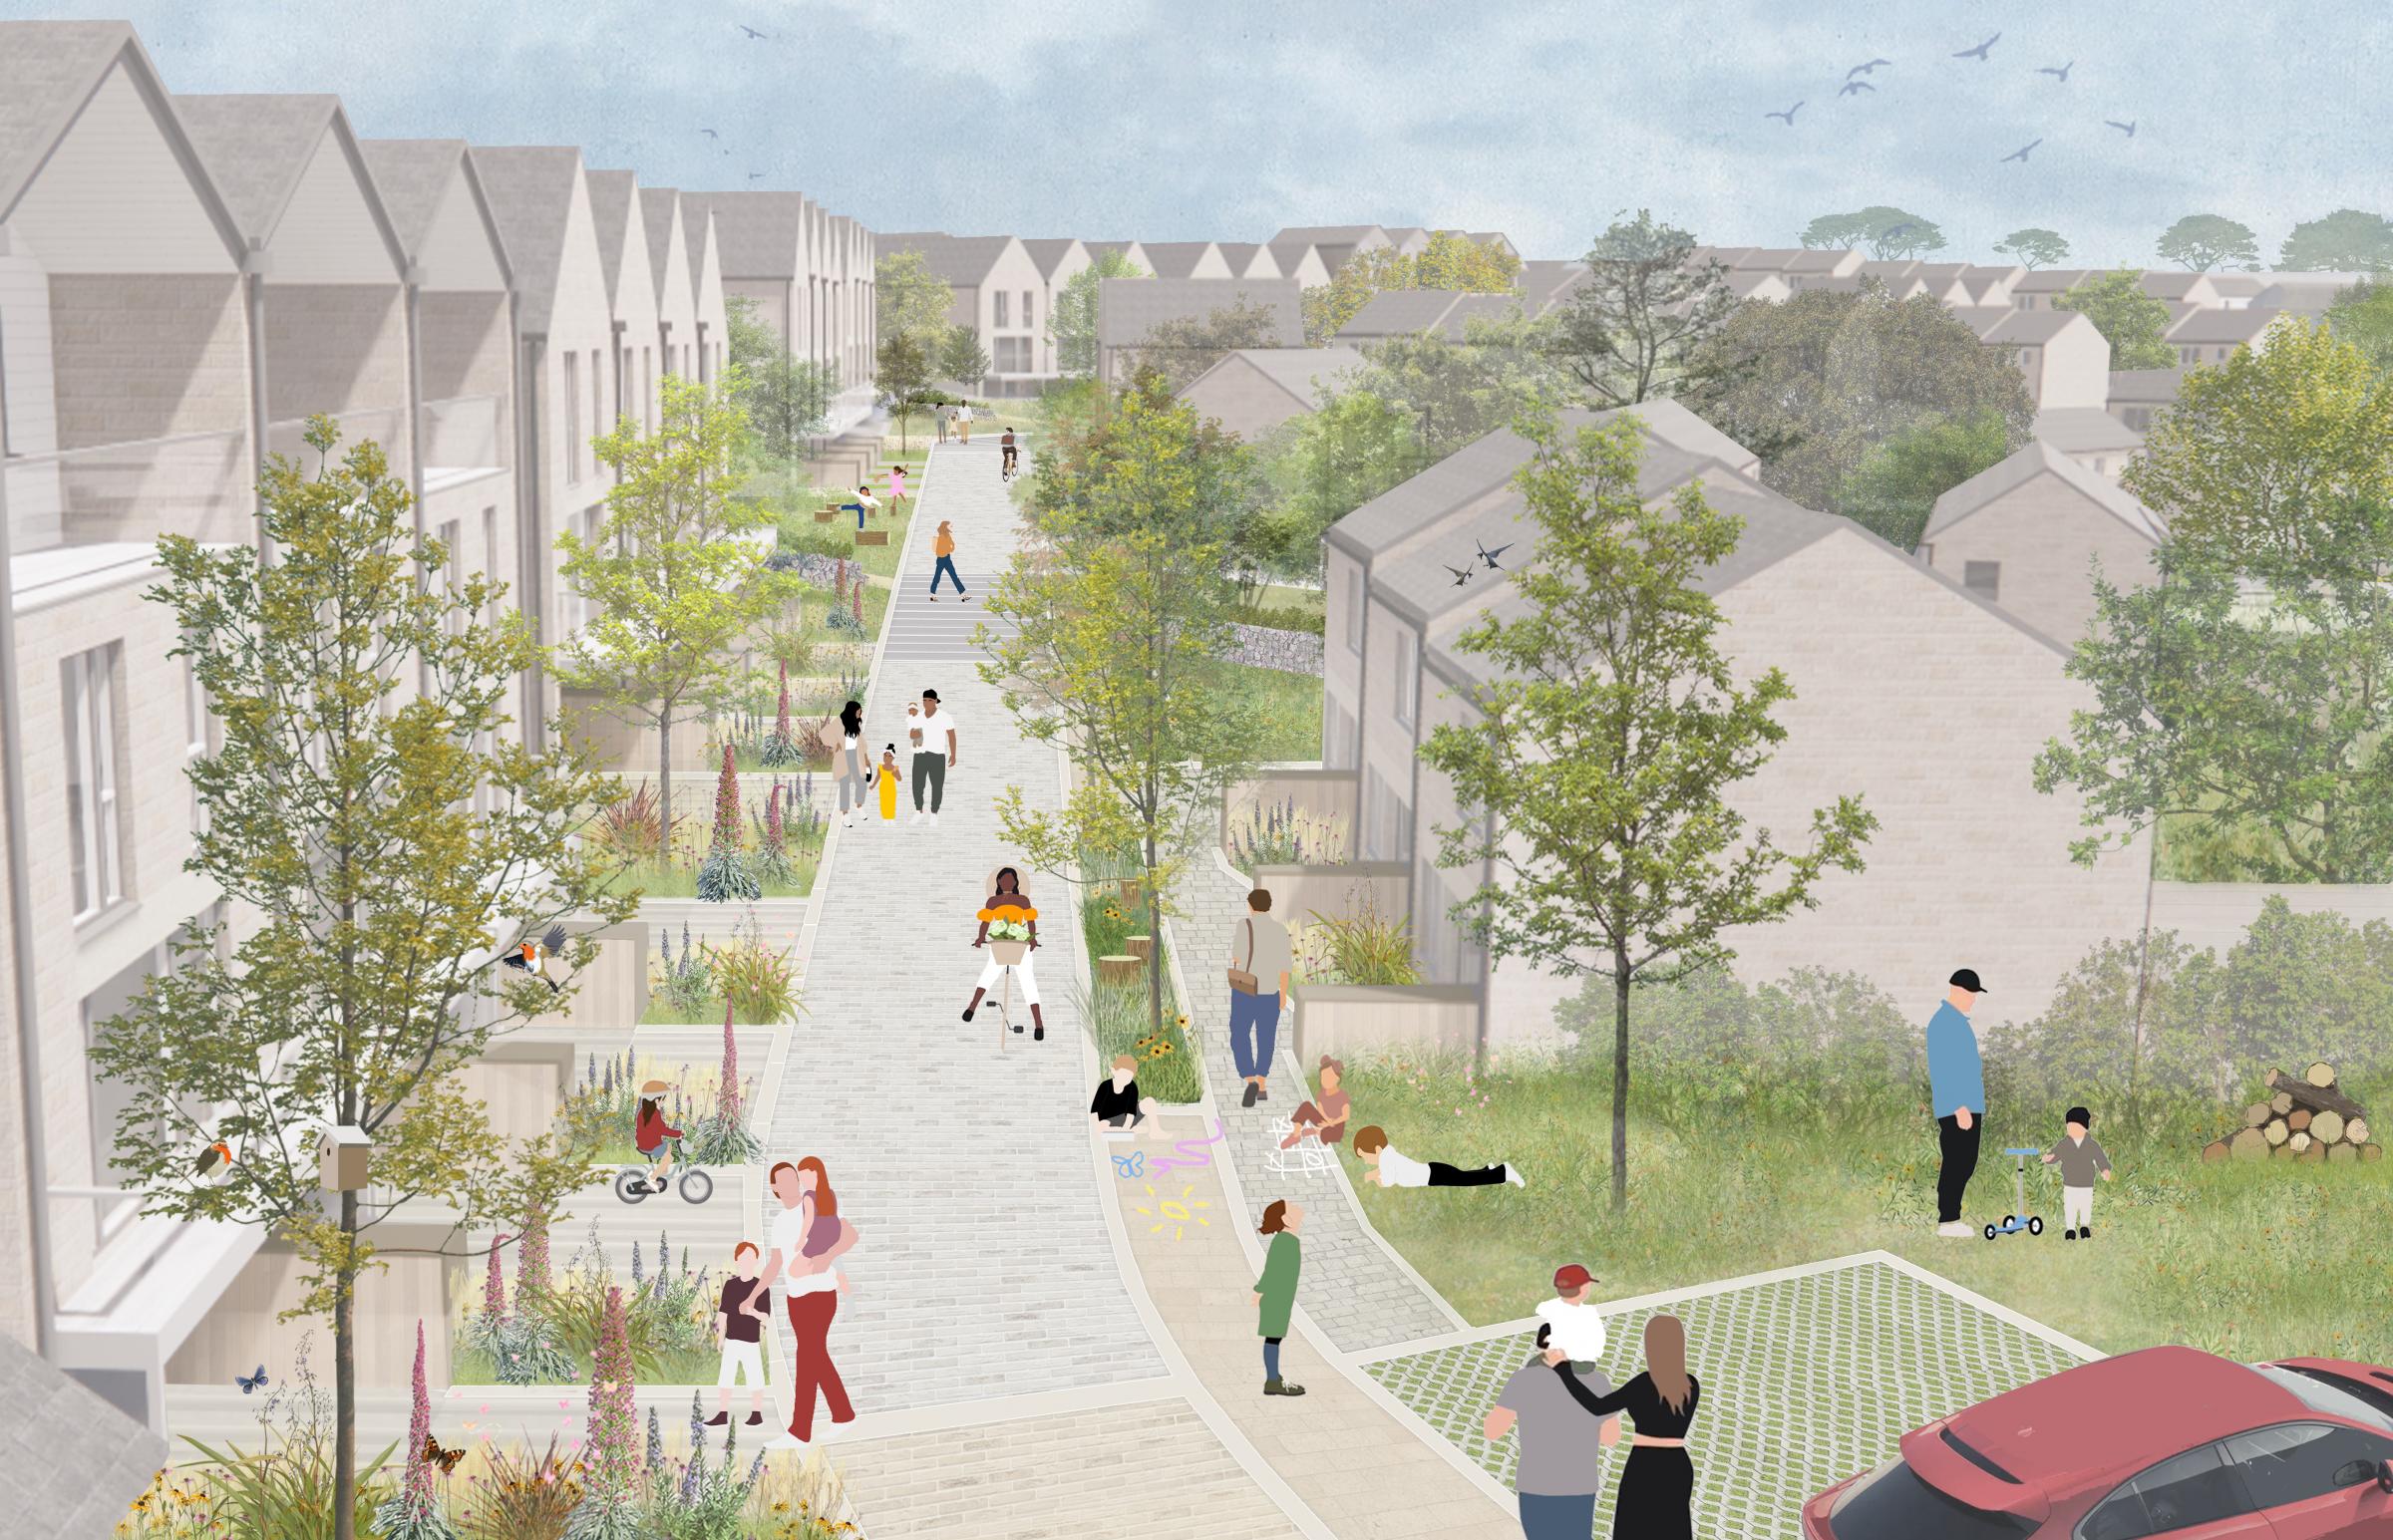 Artist\s impression of one of the streets which would be created as part of the 320-home development planned at Trannack Farm, Heamoor, near Penzance (Image: provided by developer Devonshire Homes, free to use)